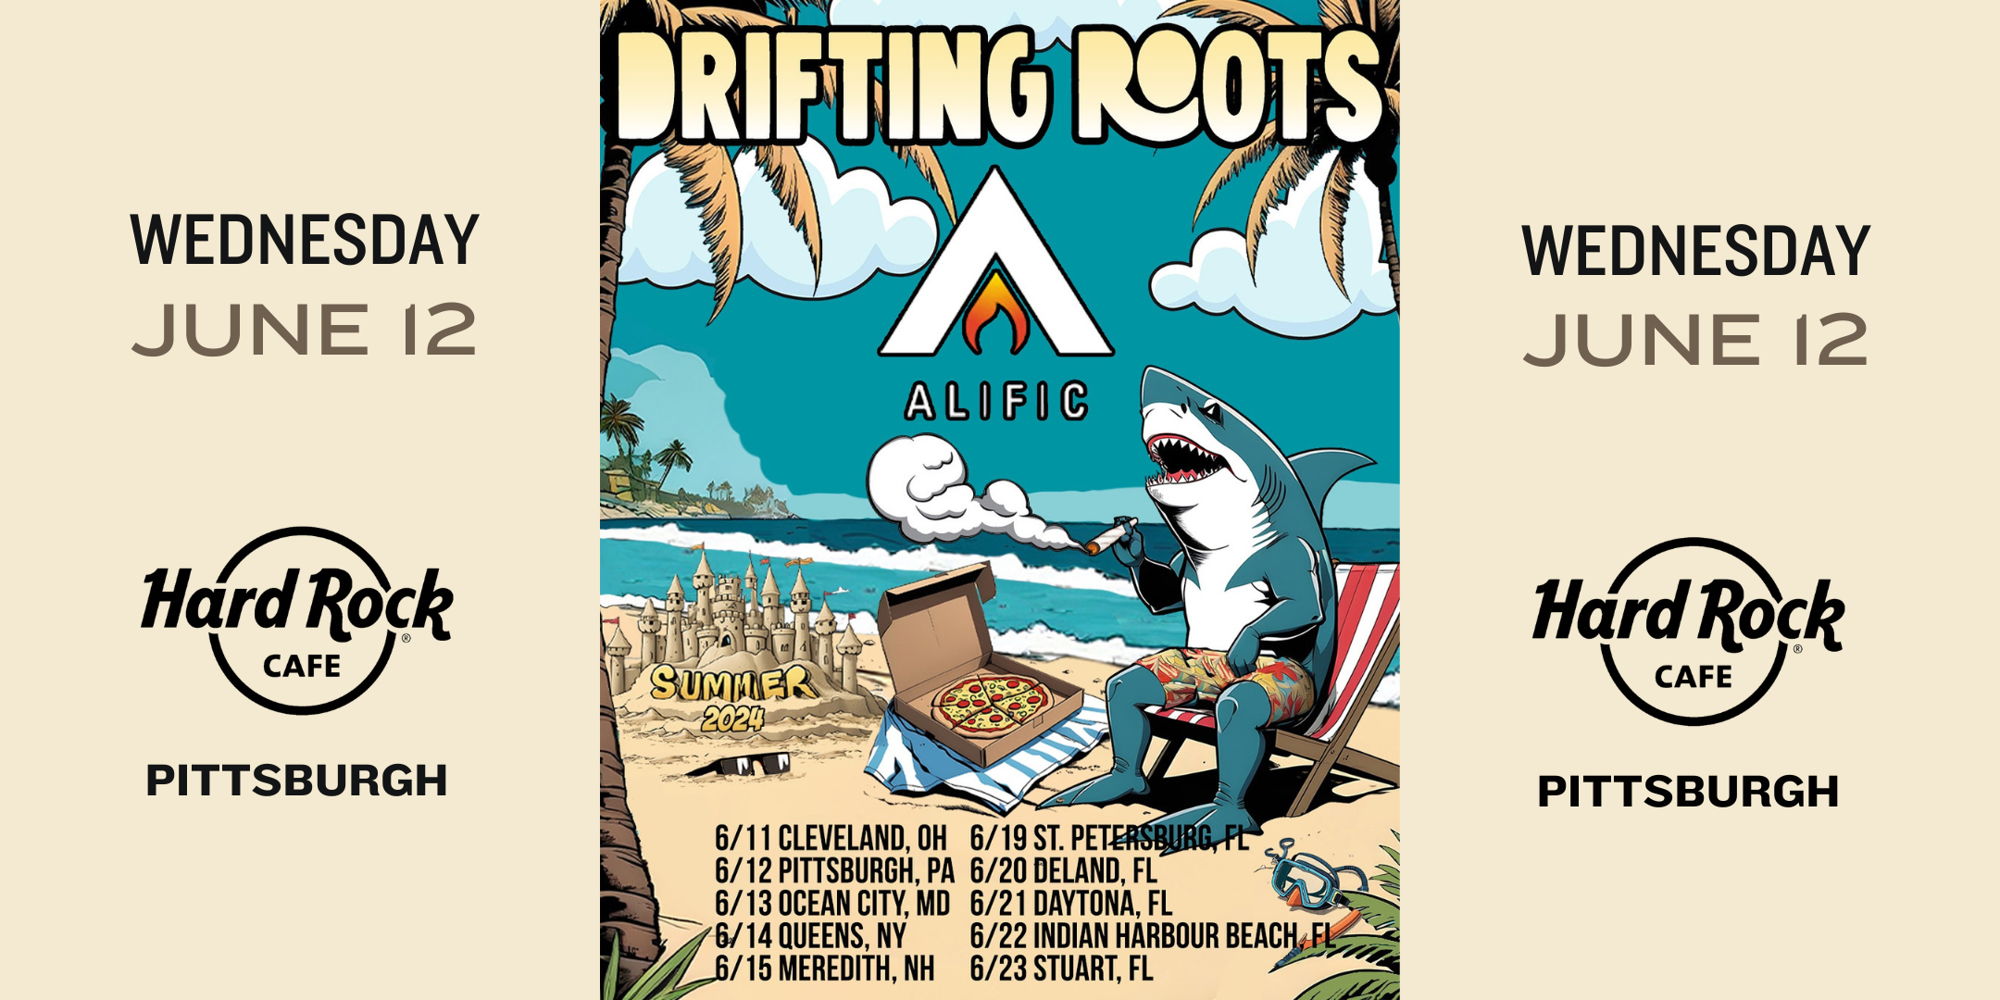 Drifting Roots w/ Alific promotional image